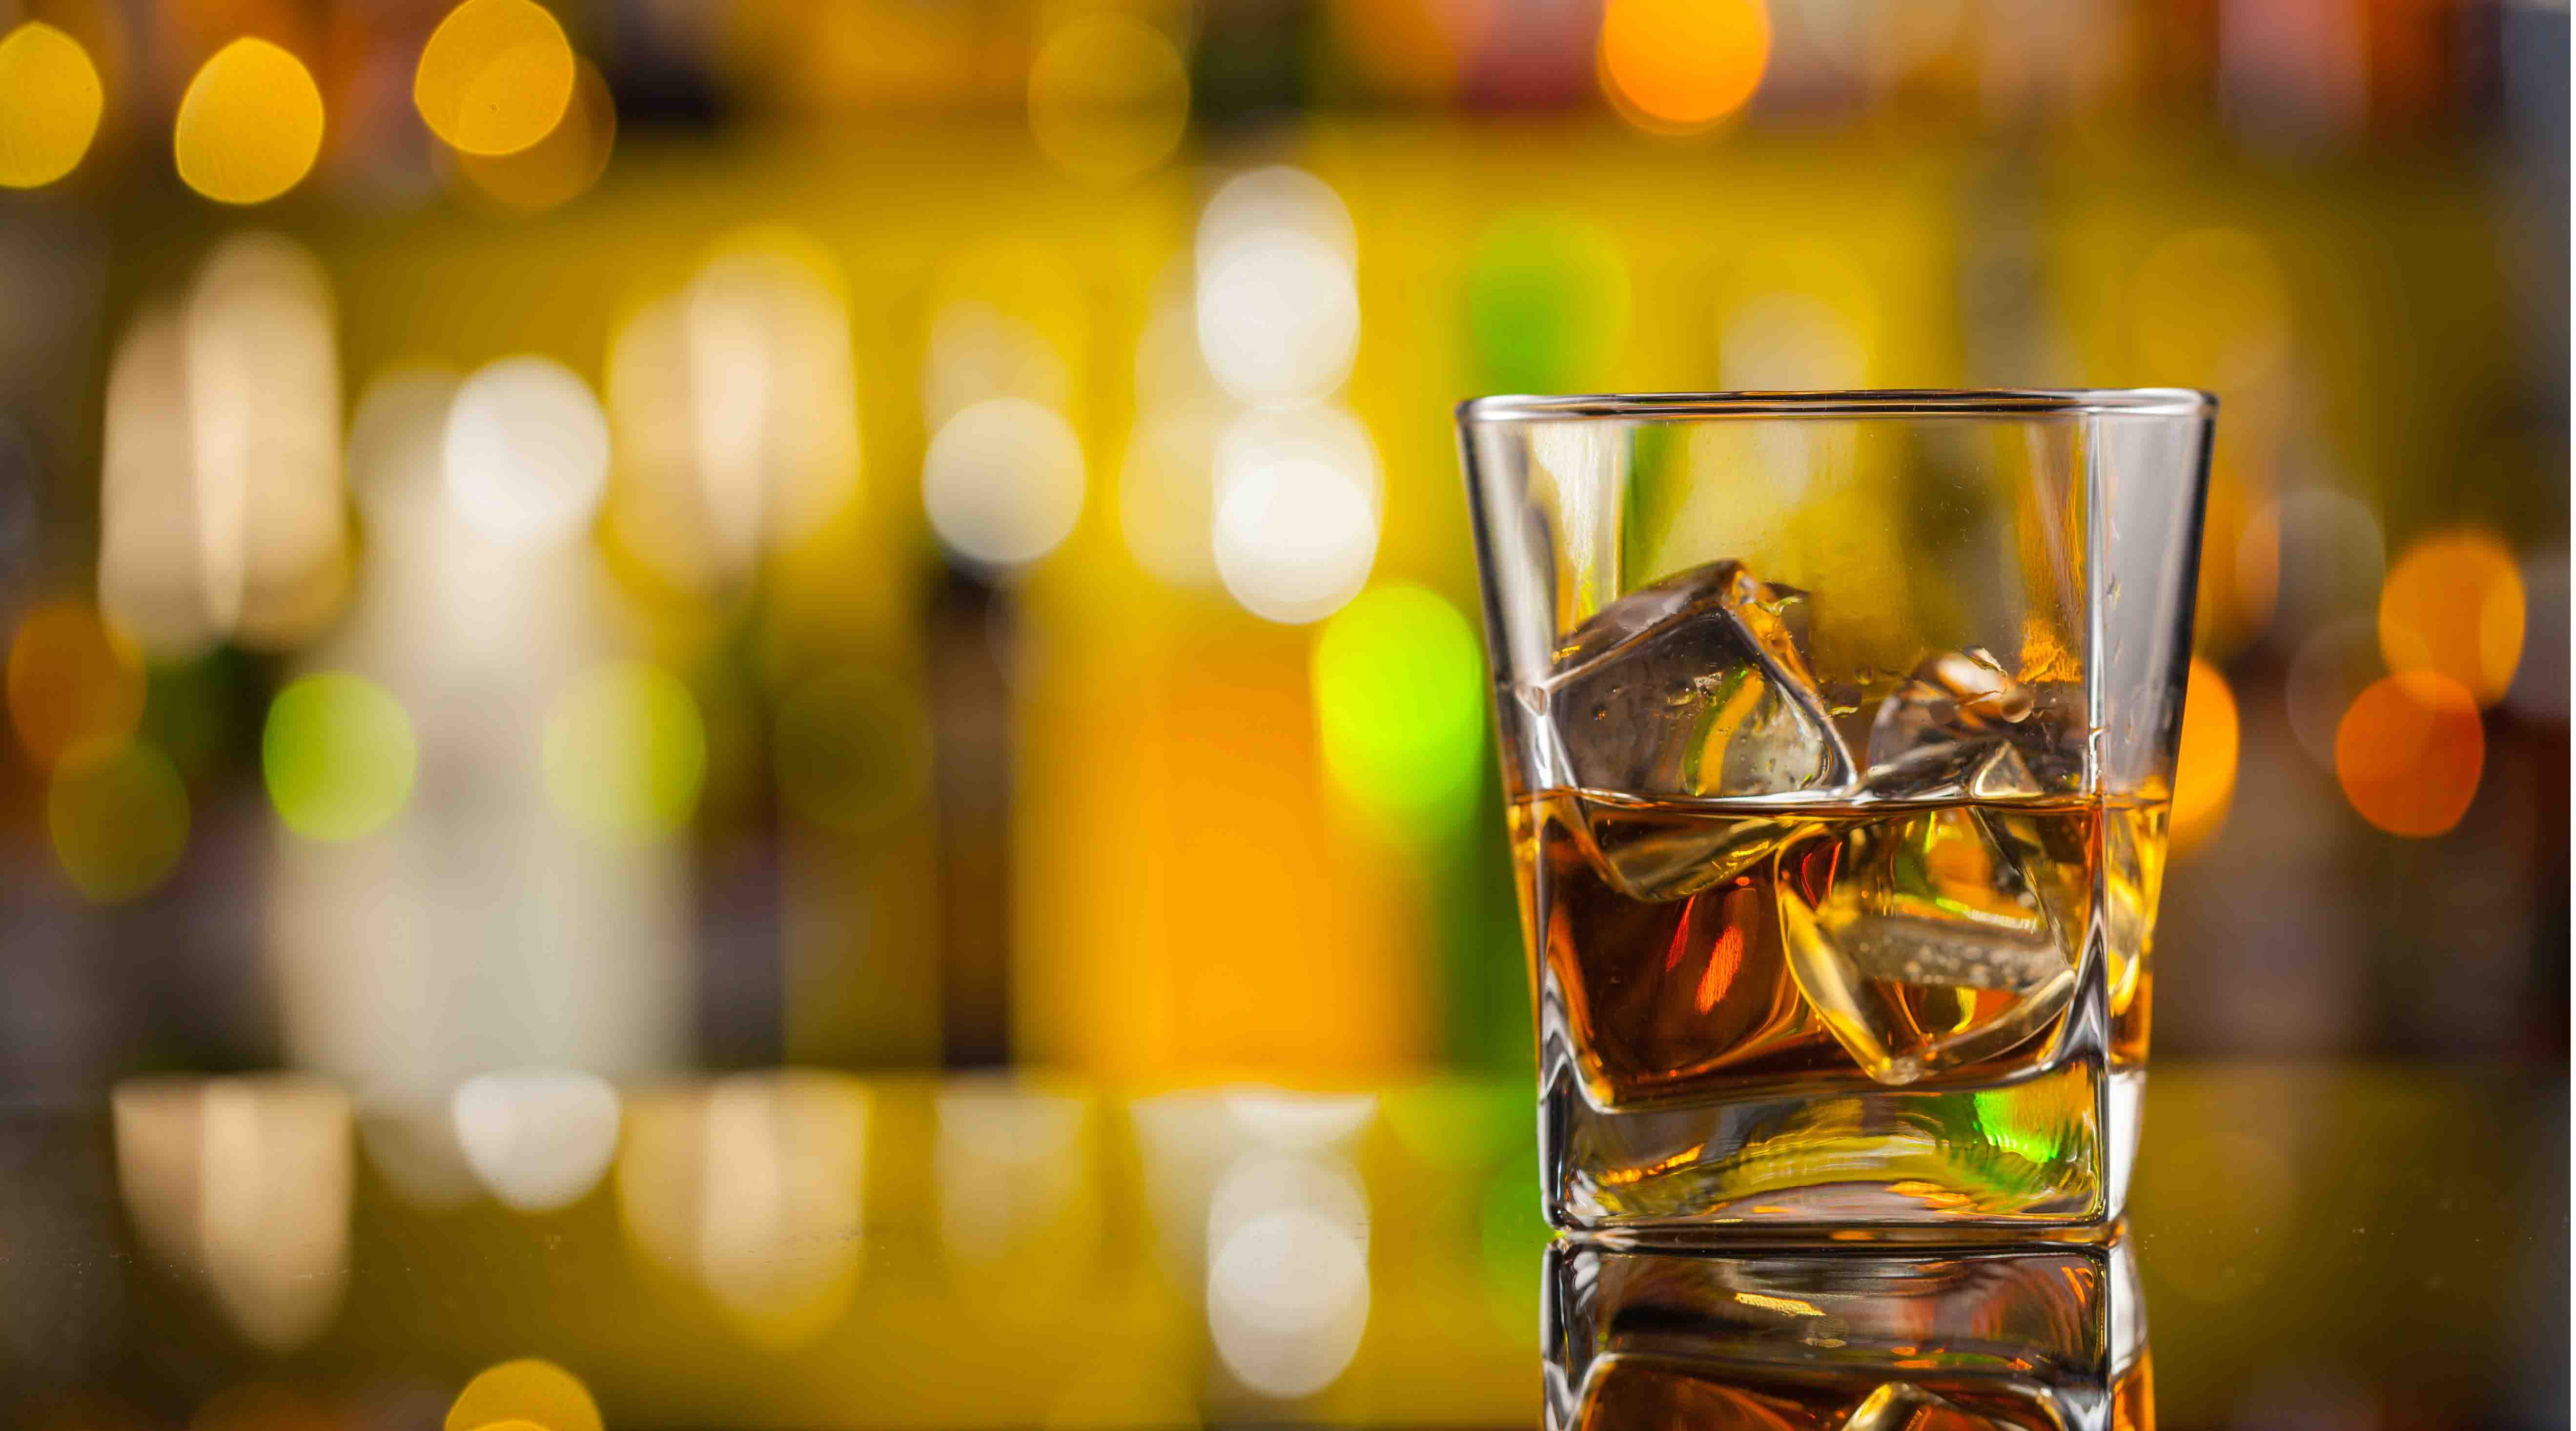 The Irish 2015-2020 spirits domestic consumption figures are in contrast to the IWSR’s global forecast which indicates that the international spirits market will grow.